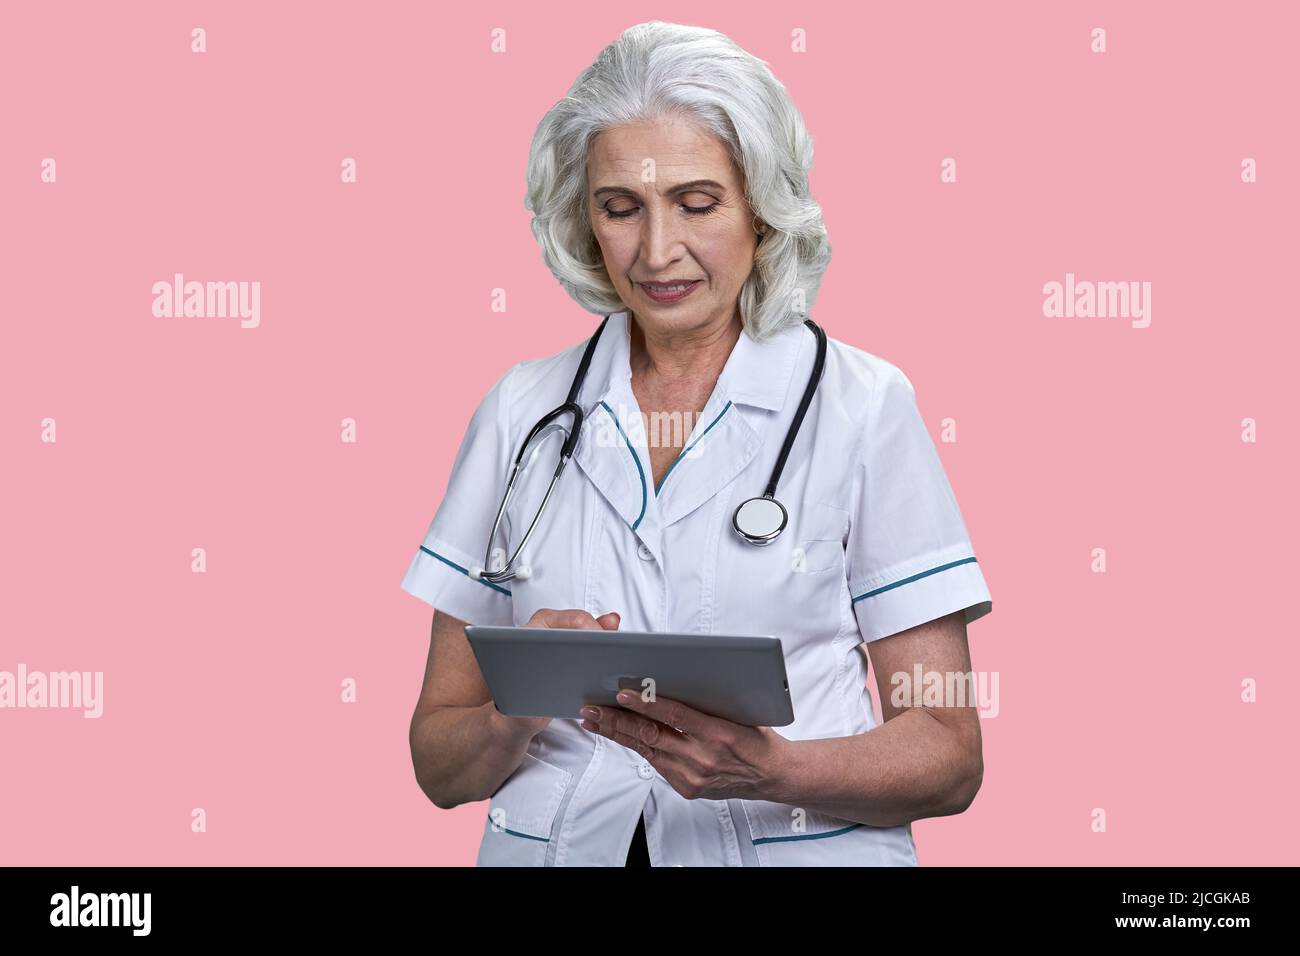 Mature female doctor using digital tablet on pink background. Senior woman doctor looking at computer tablet. Stock Photo